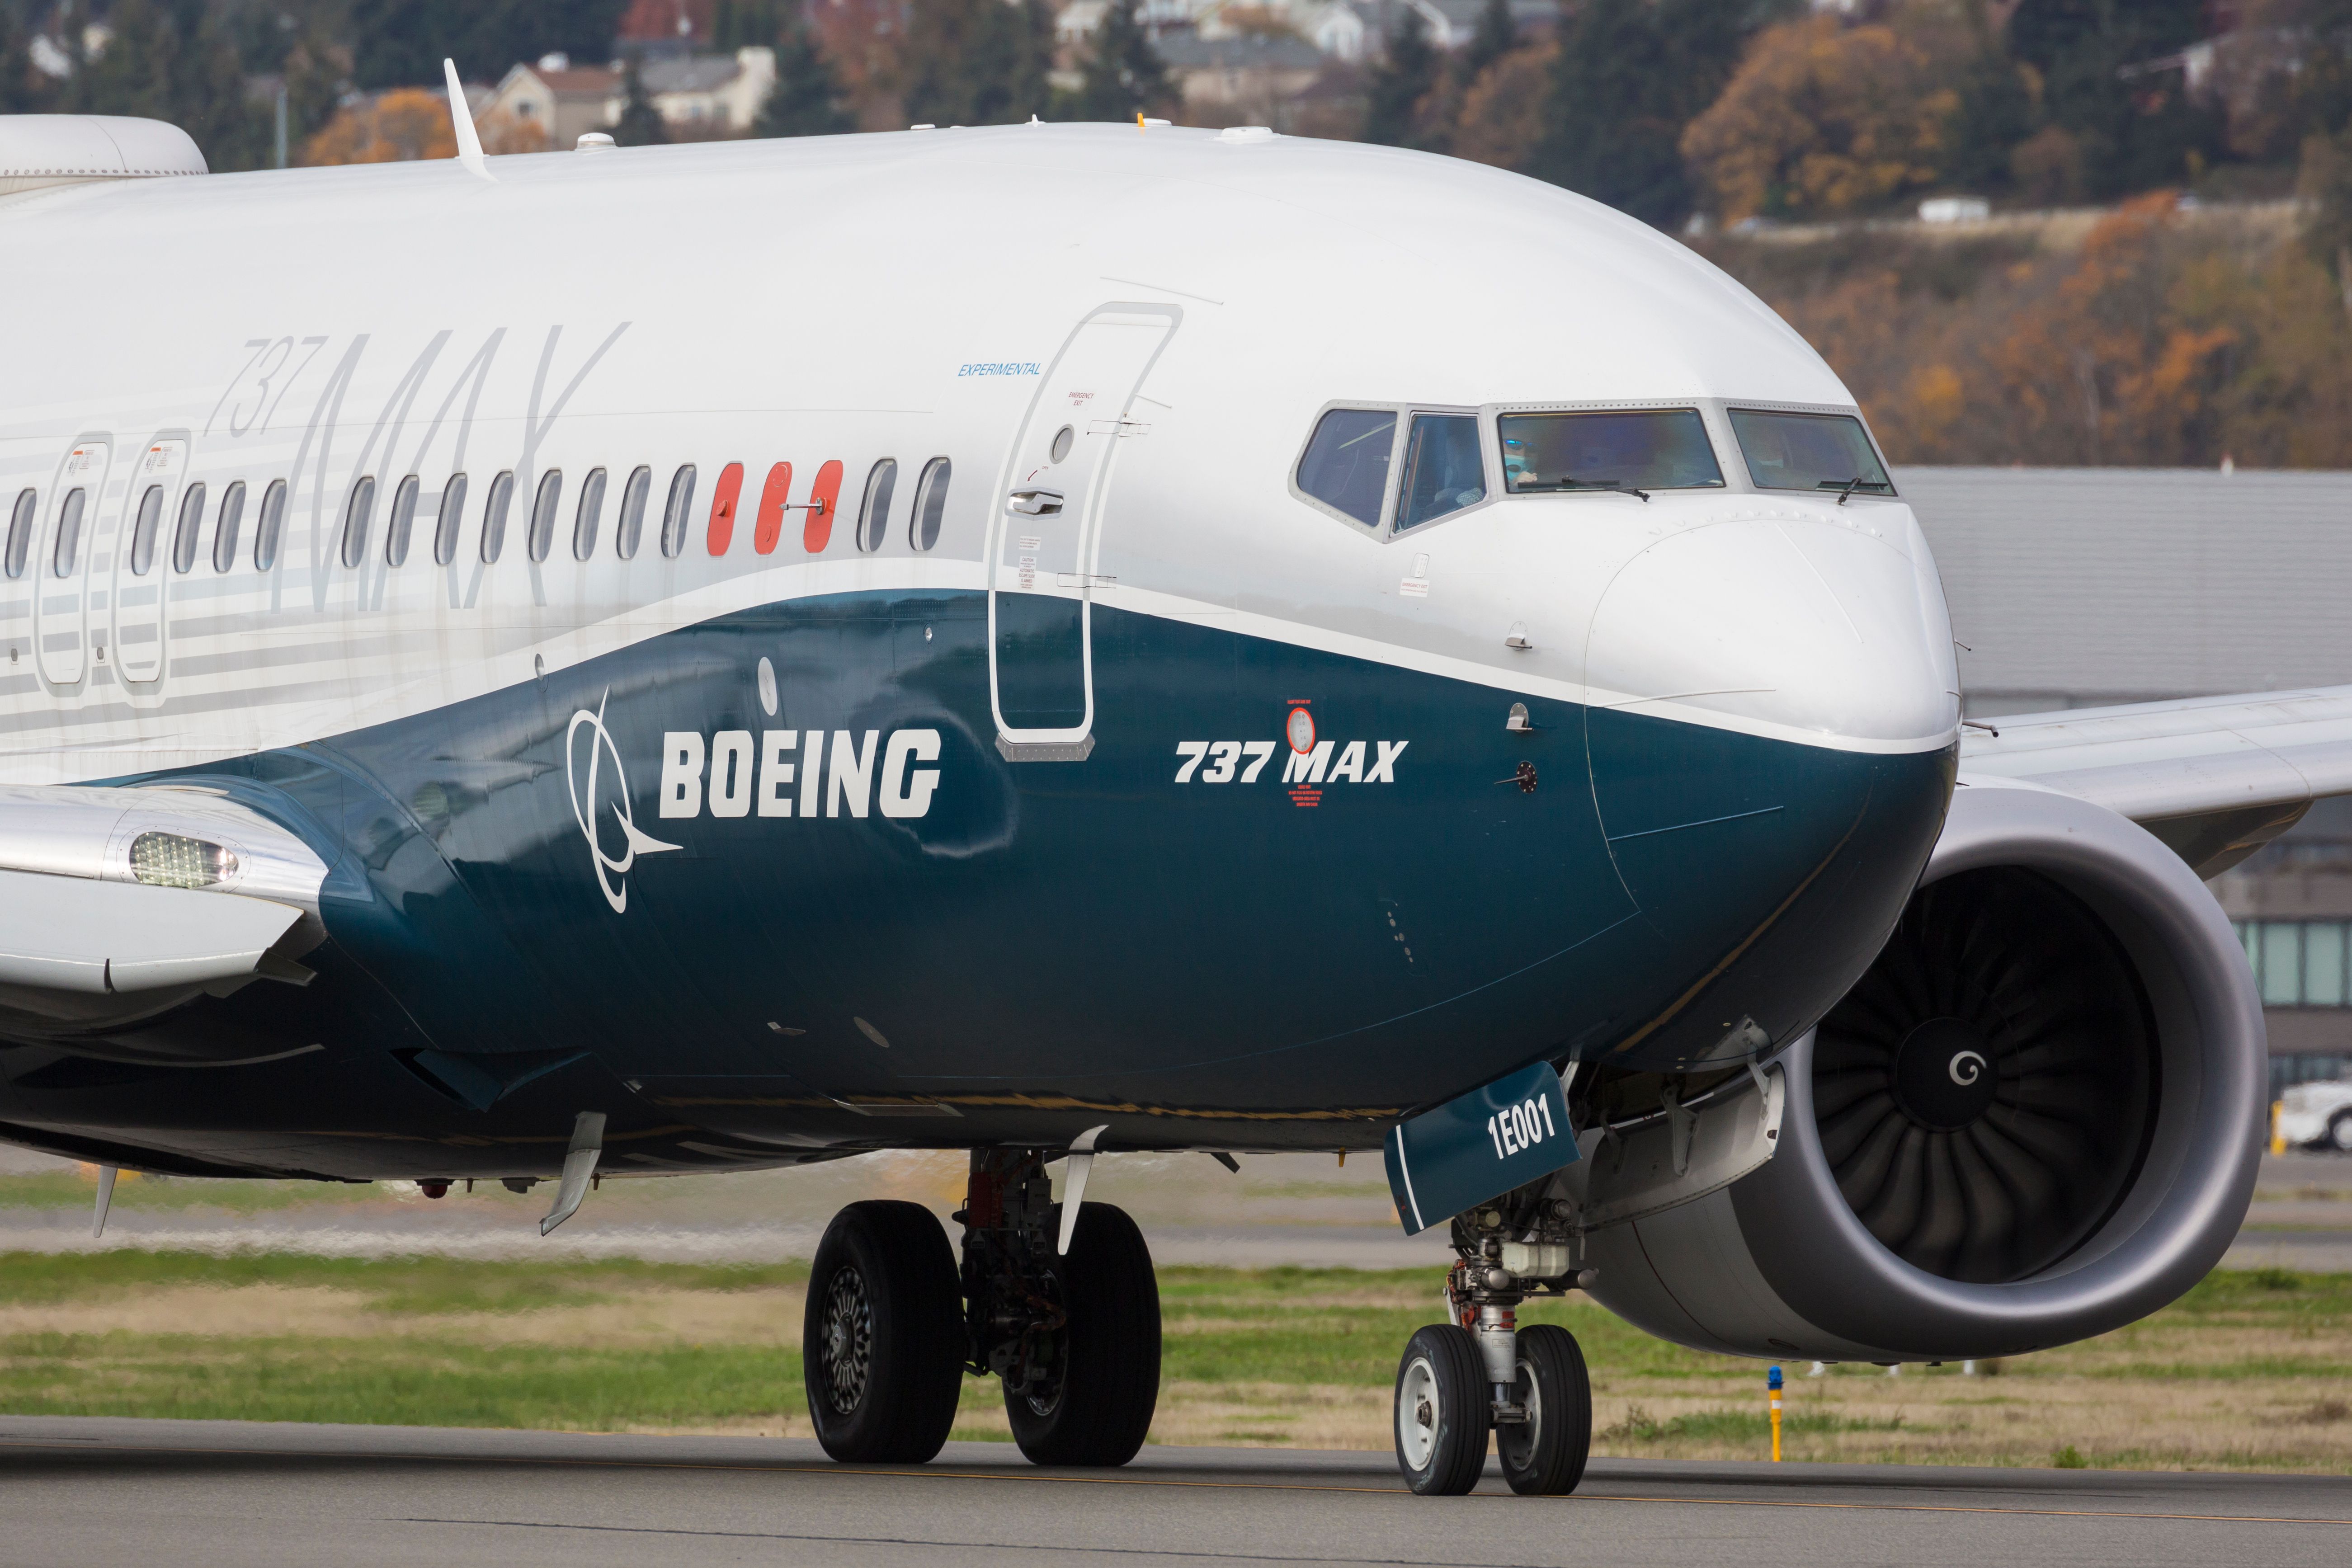 A Closeup of a Boeing 737 MAX on an airport apron.